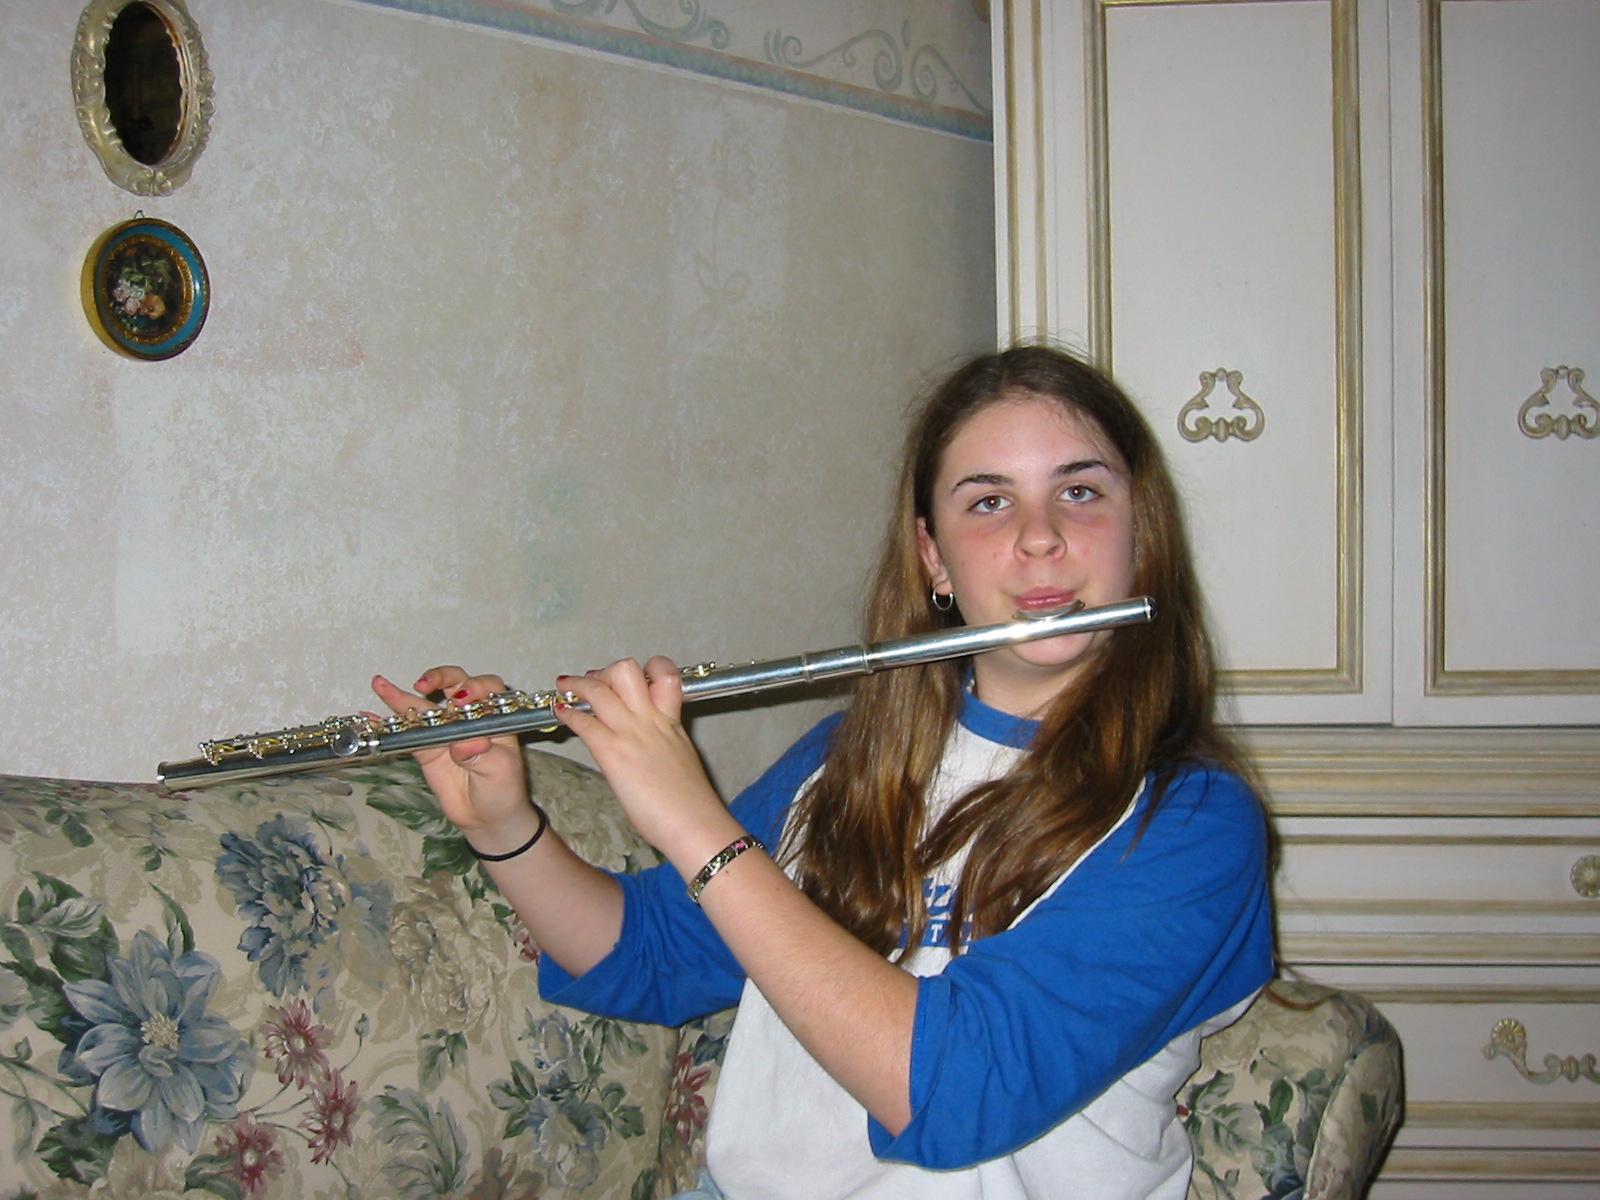 click to hear Lovely Daughter play the flute